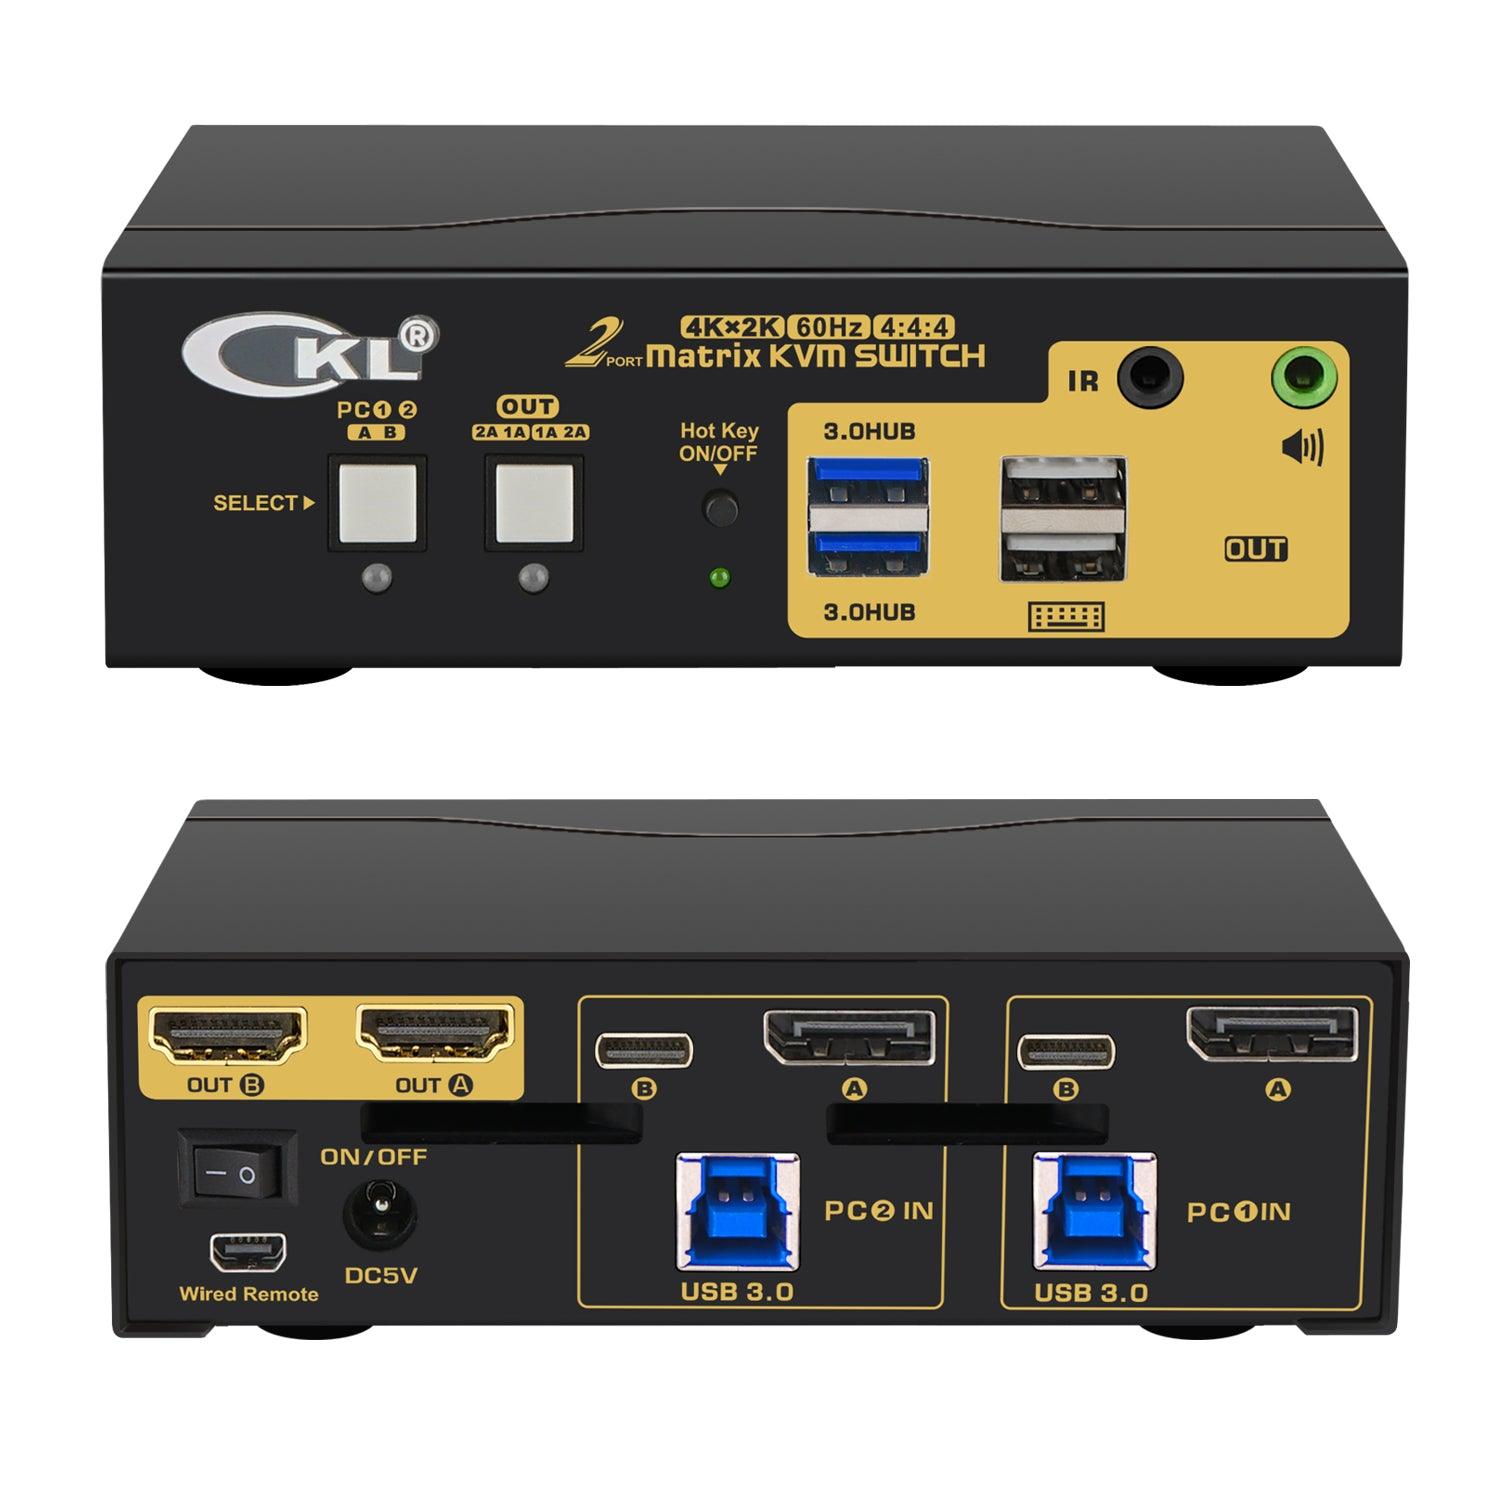 CKL 2x2 Matrix USB Type C +DisplayPort KVM Switch Dual Monitor USB 3.0 4K 60Hz, PC Monitor Keyboard Mouse Peripherals Sharing Box with Cables for 2 Computers or Laptops CKL-622TD-M - CKL KVM Switches